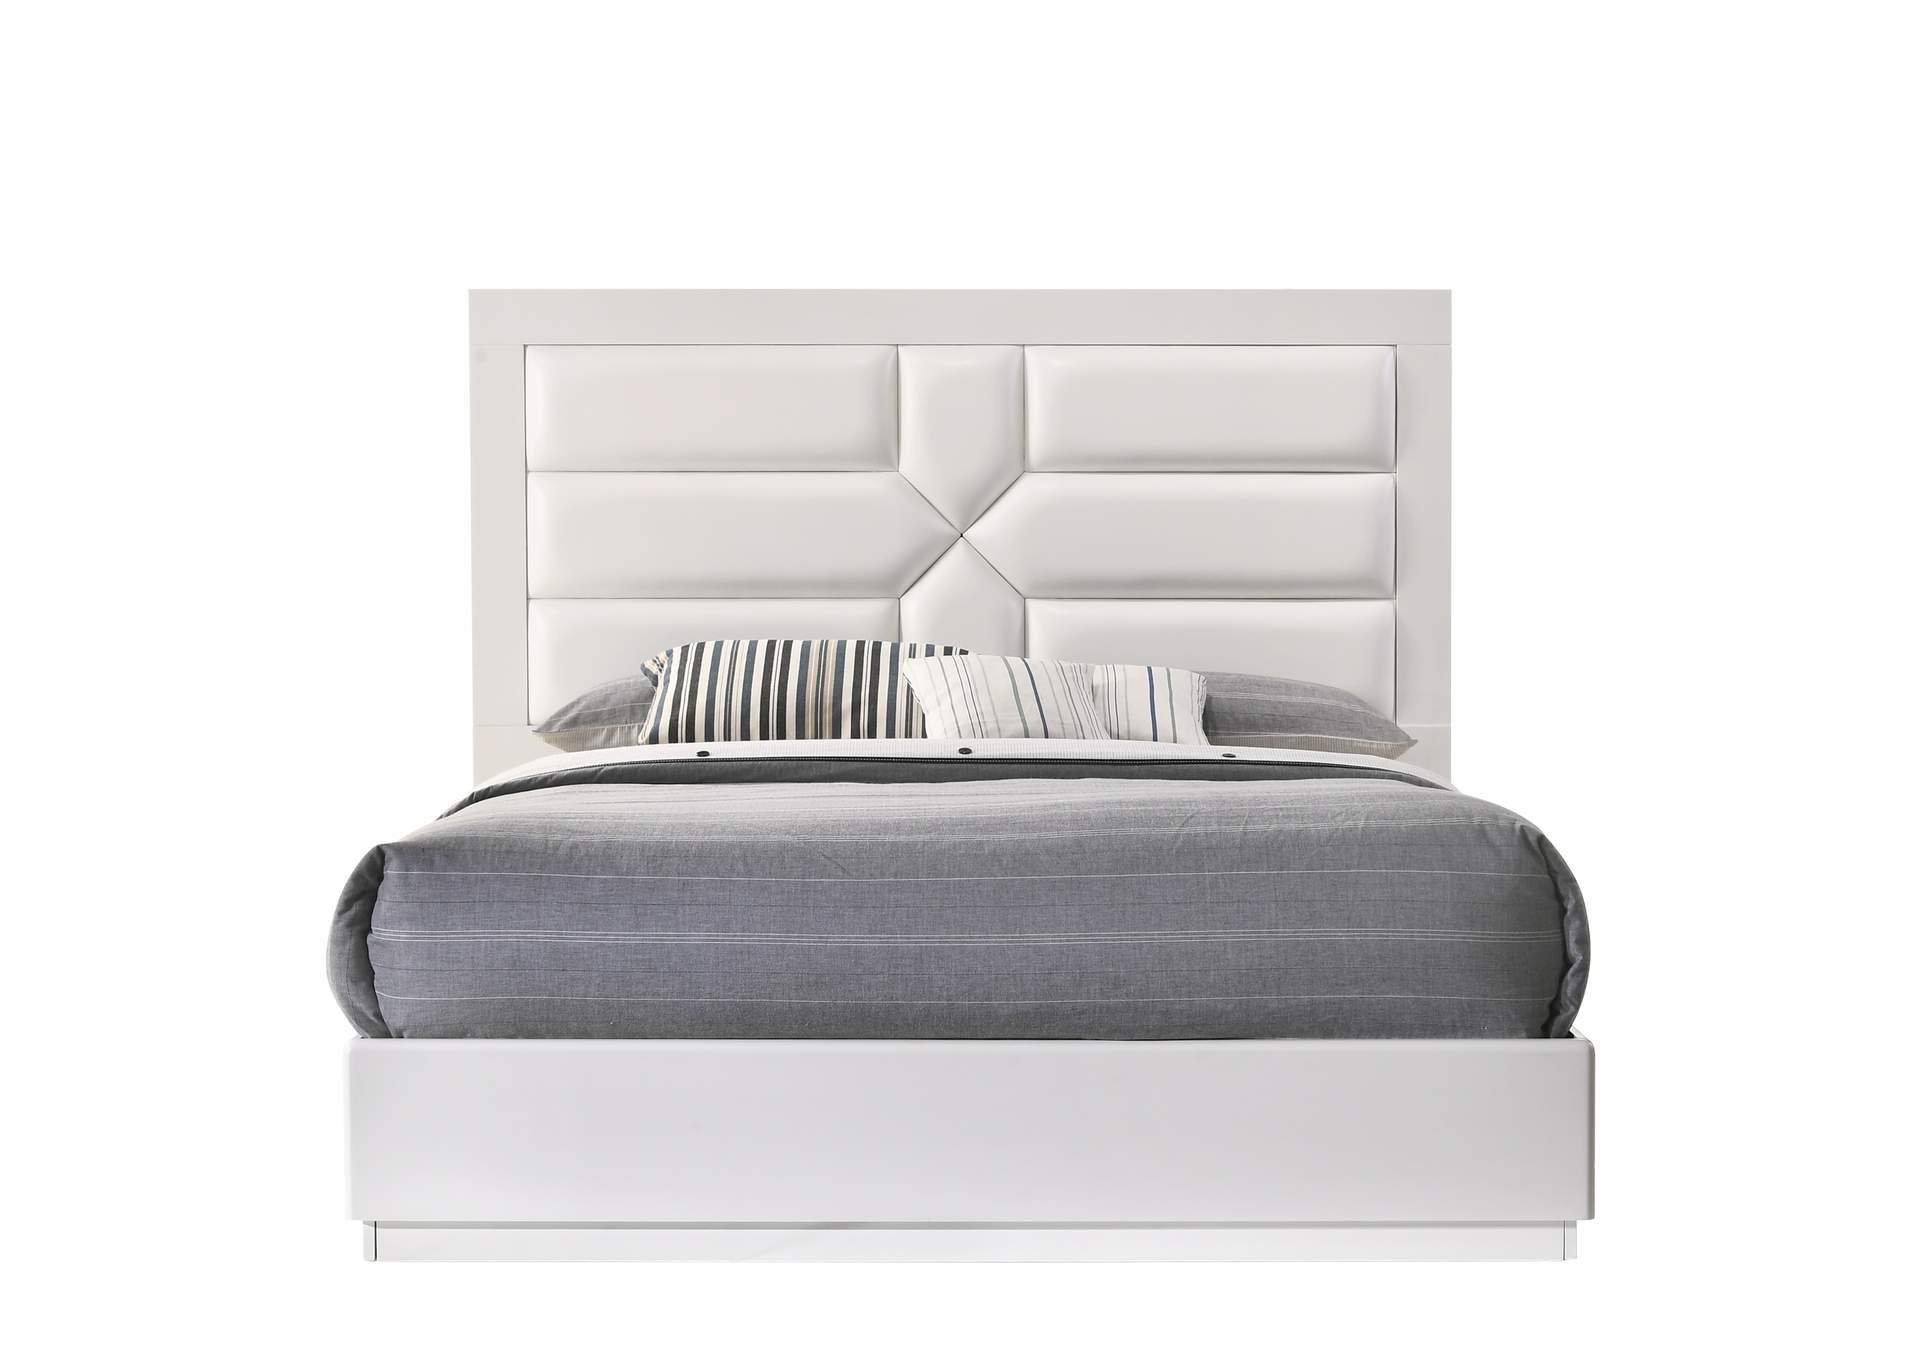 Contemporary Bedroom Set With Queen Size Bed,Chintaly Imports